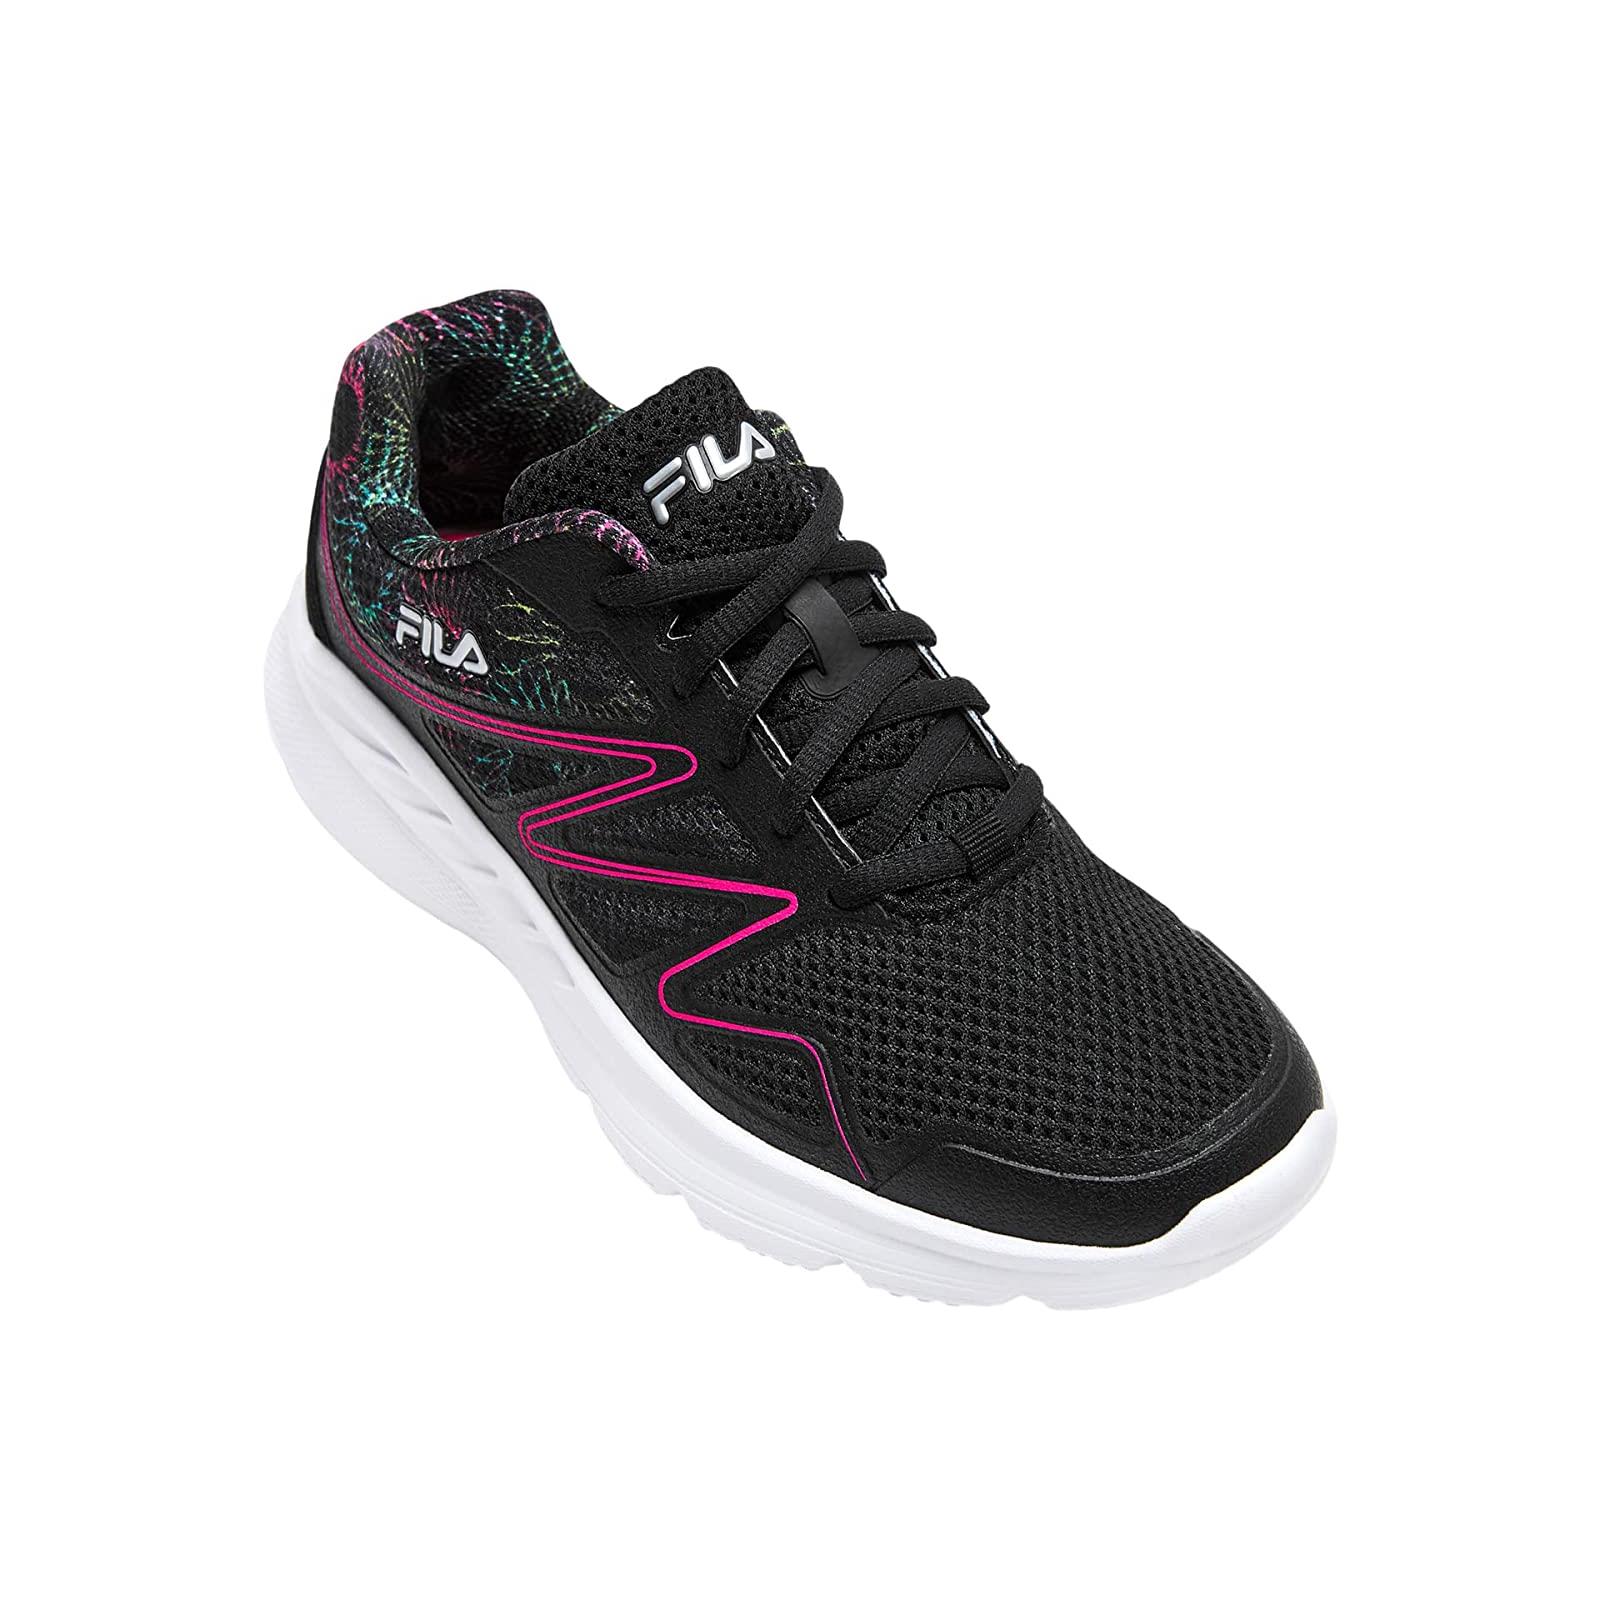 Woman`s Sneakers Athletic Shoes Fila Memory Panorama 9 Black/White/Pink Glo